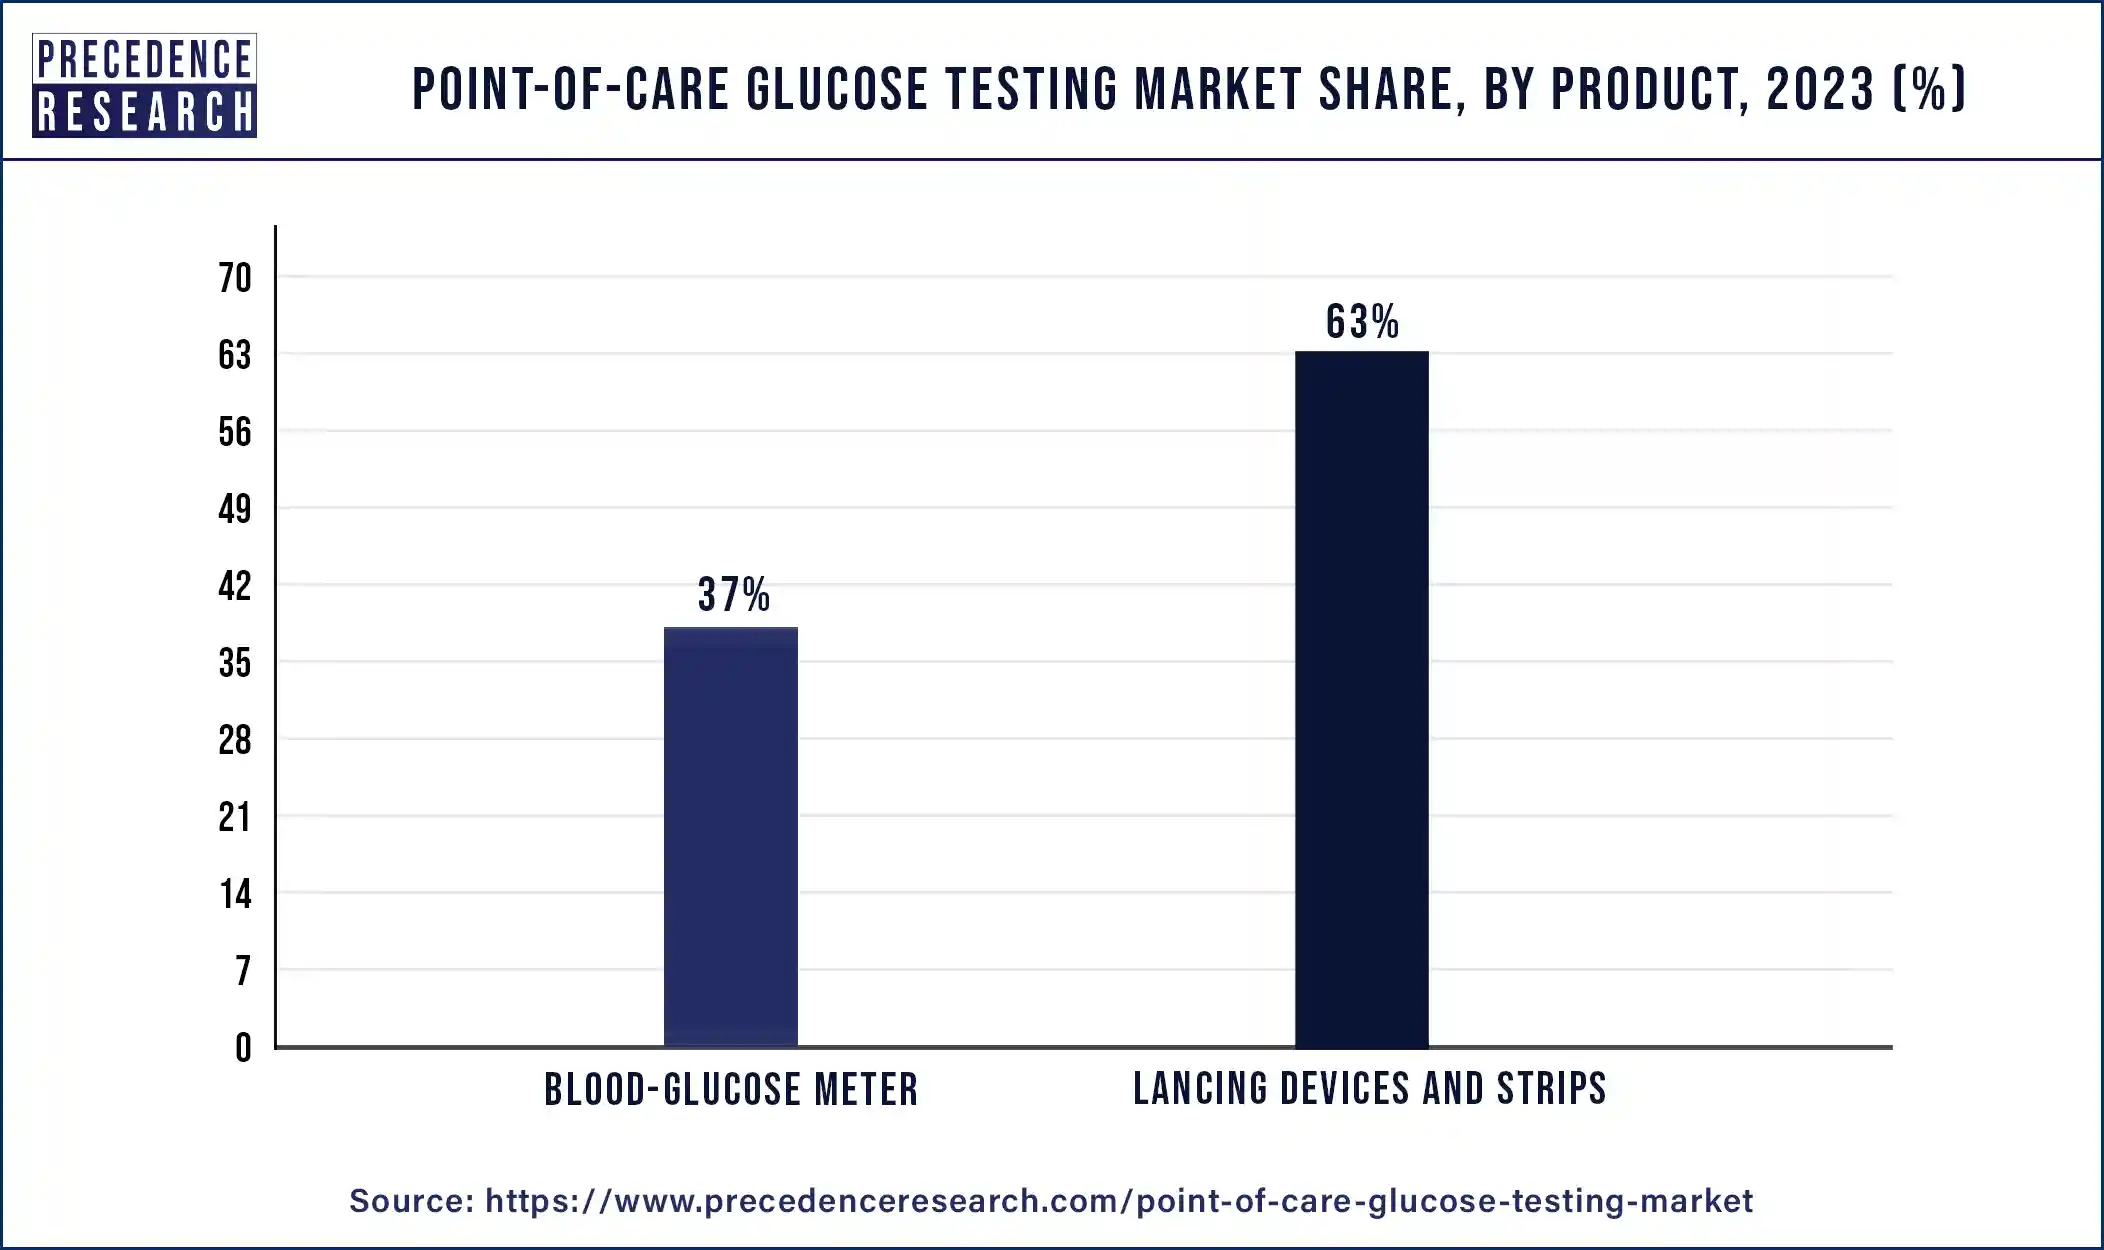 Point-of-Care Glucose Testing Market Share, By Product, 2023 (%)